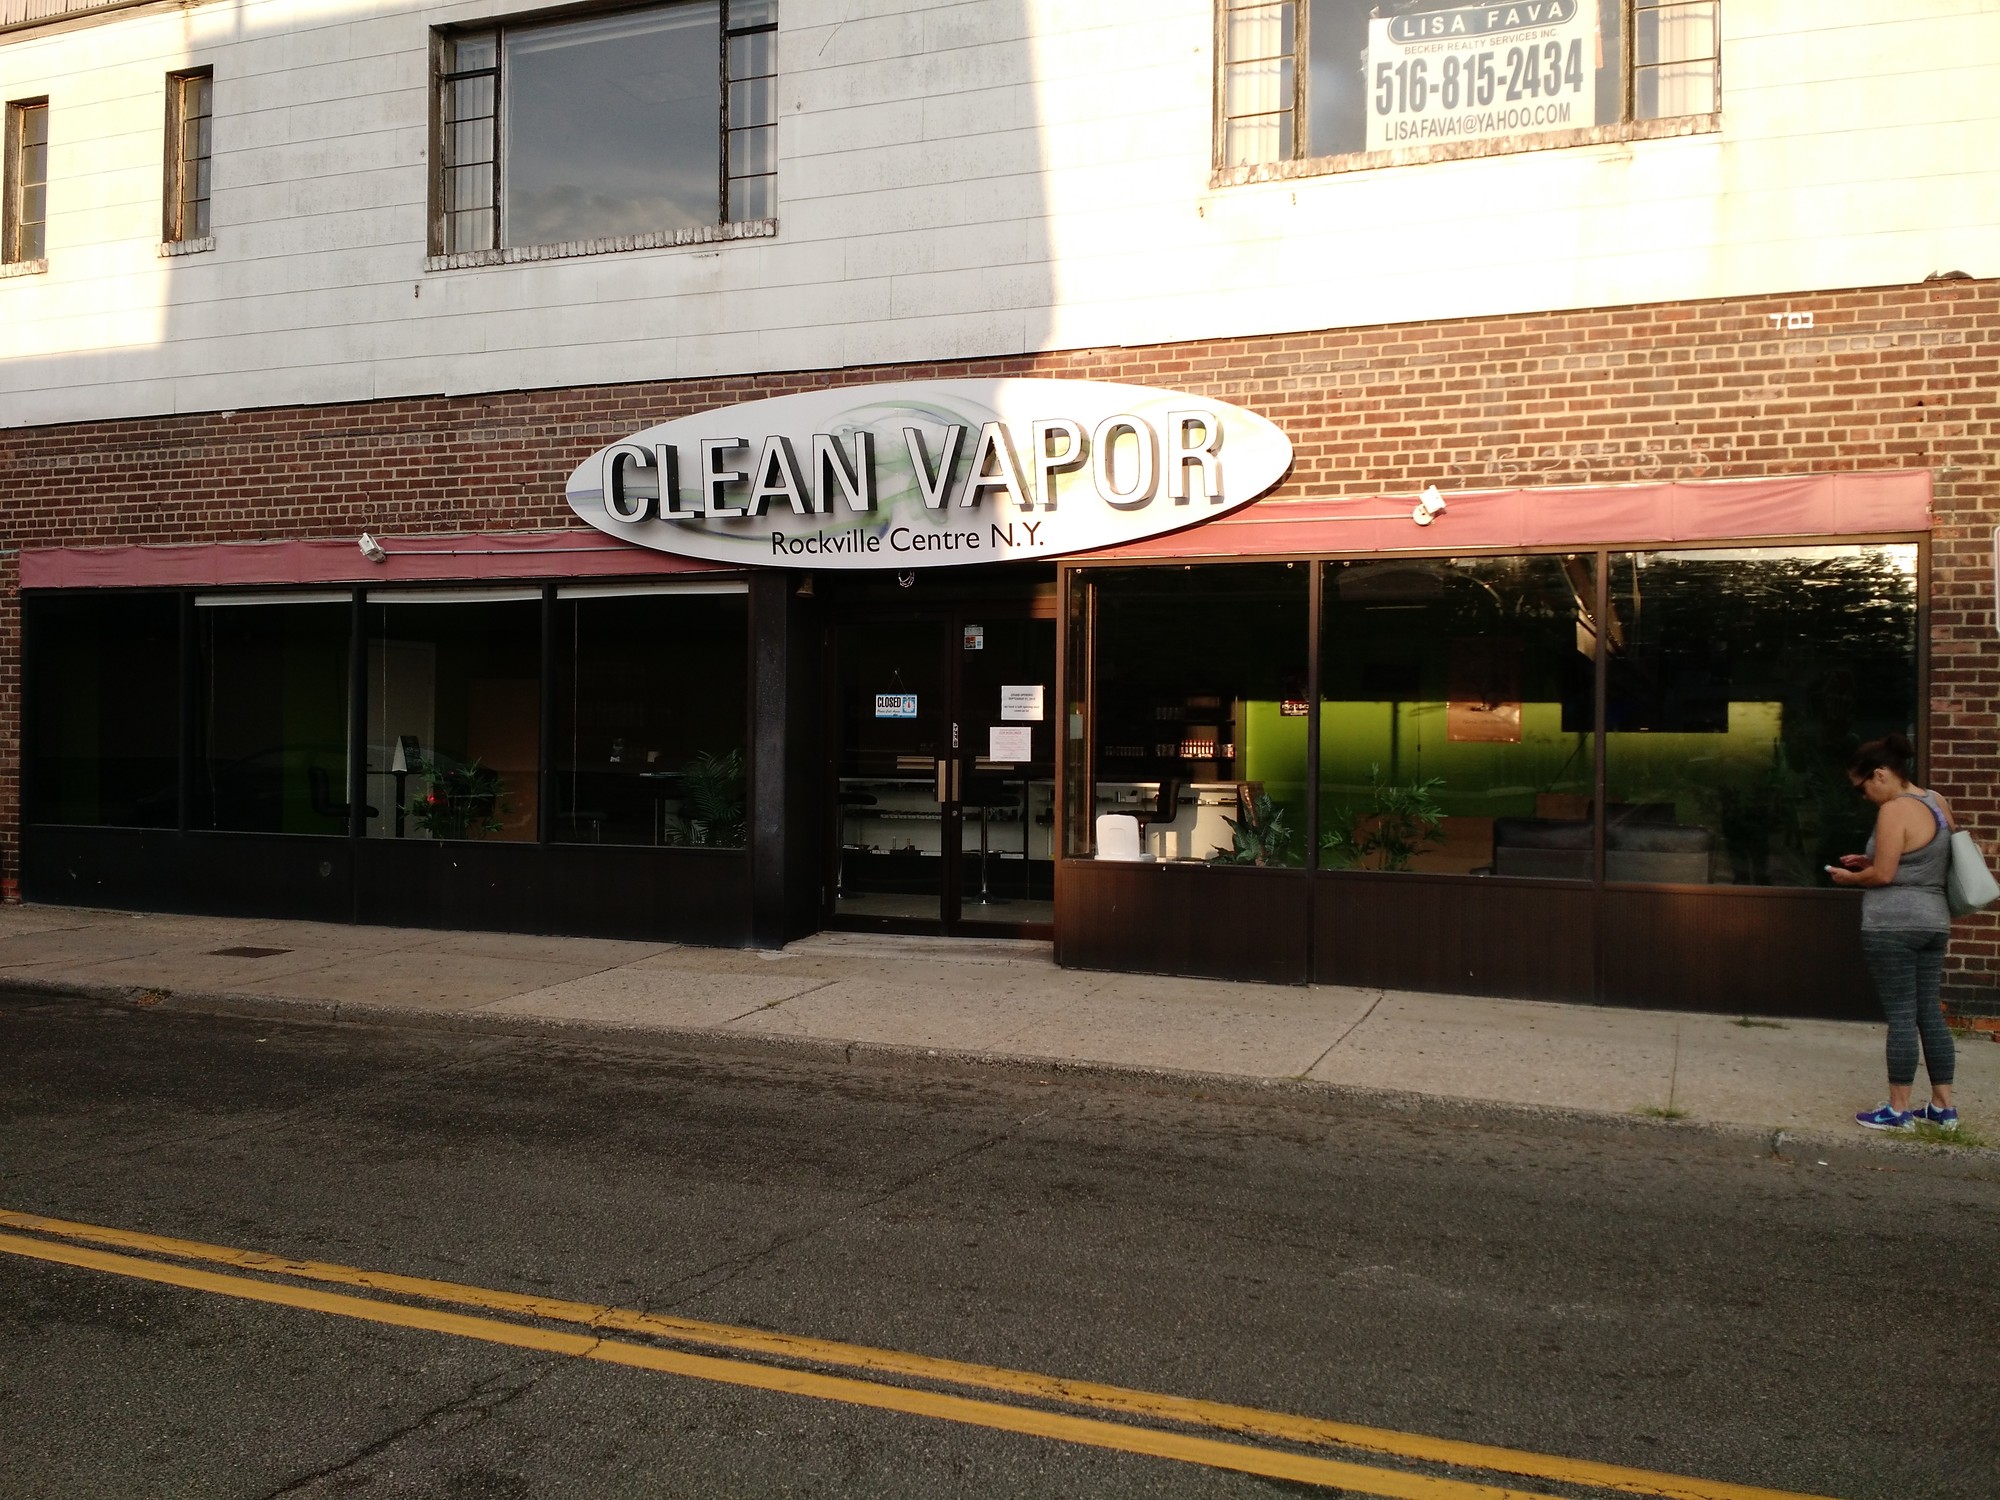 Clean Vapor Rockville Centre was shut down by the village under its law banning hookah bars. The owners are currently fighting the stop work order they received.